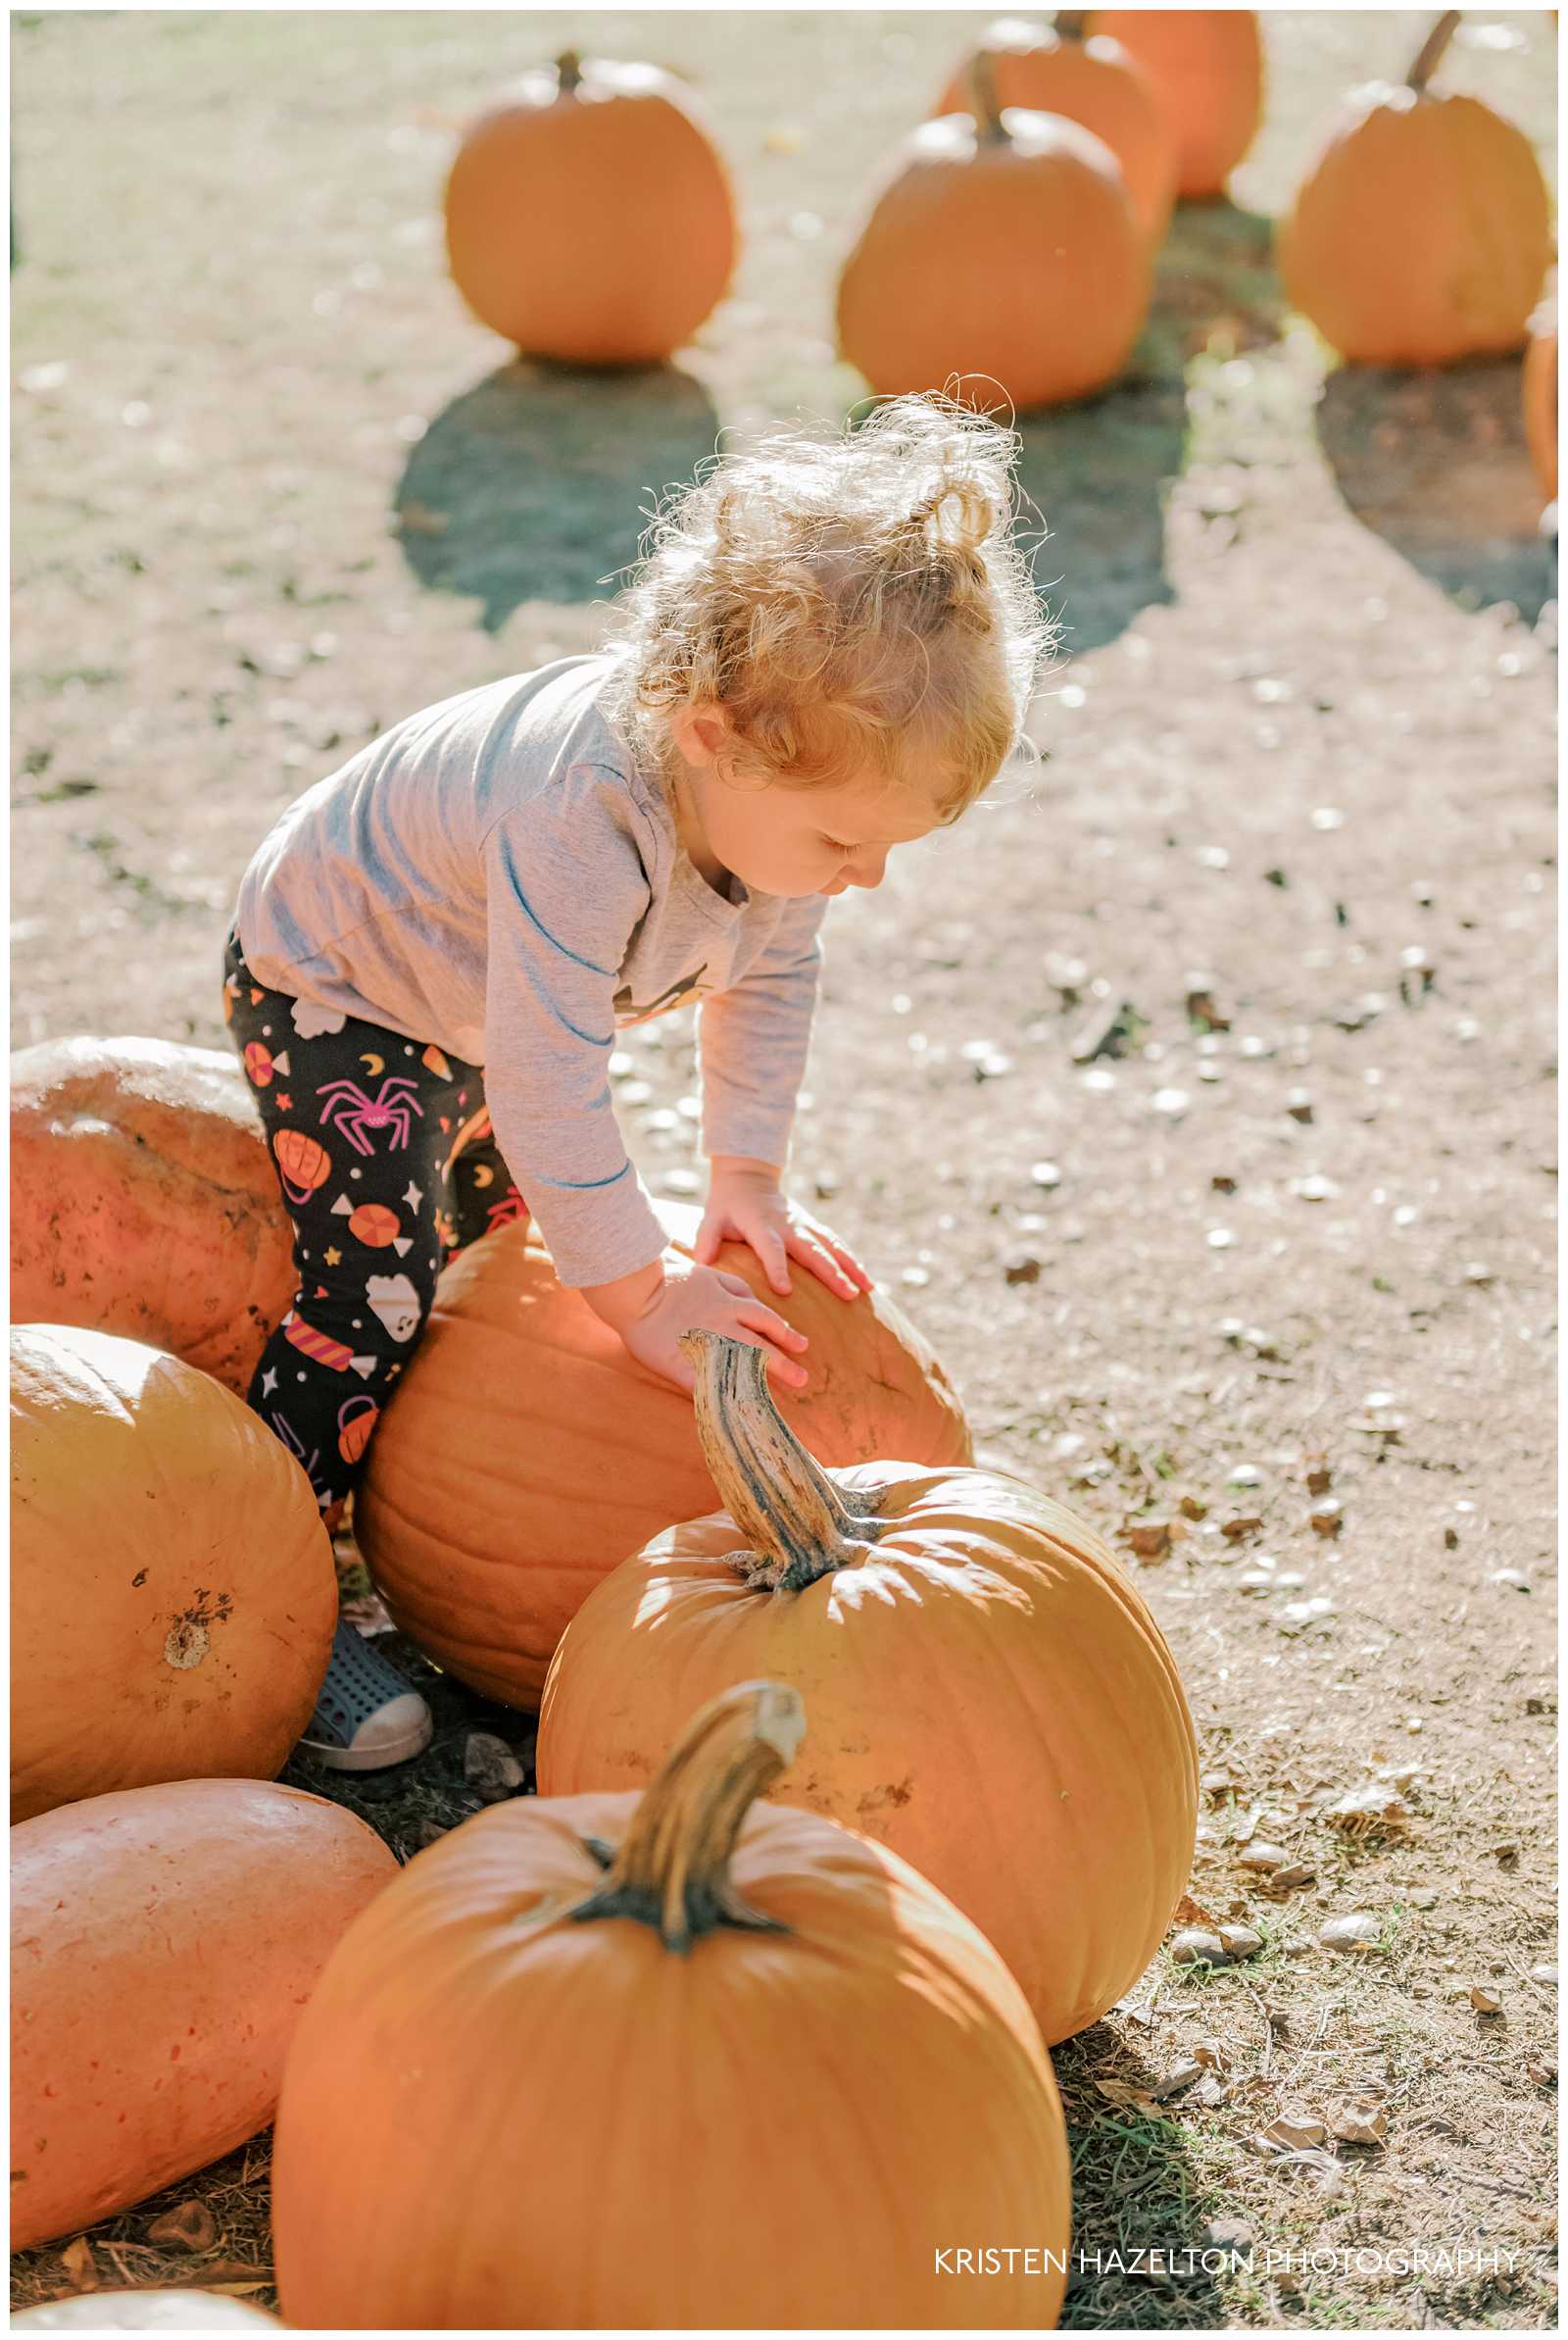 Toddler girl trying to pick a pumpkin